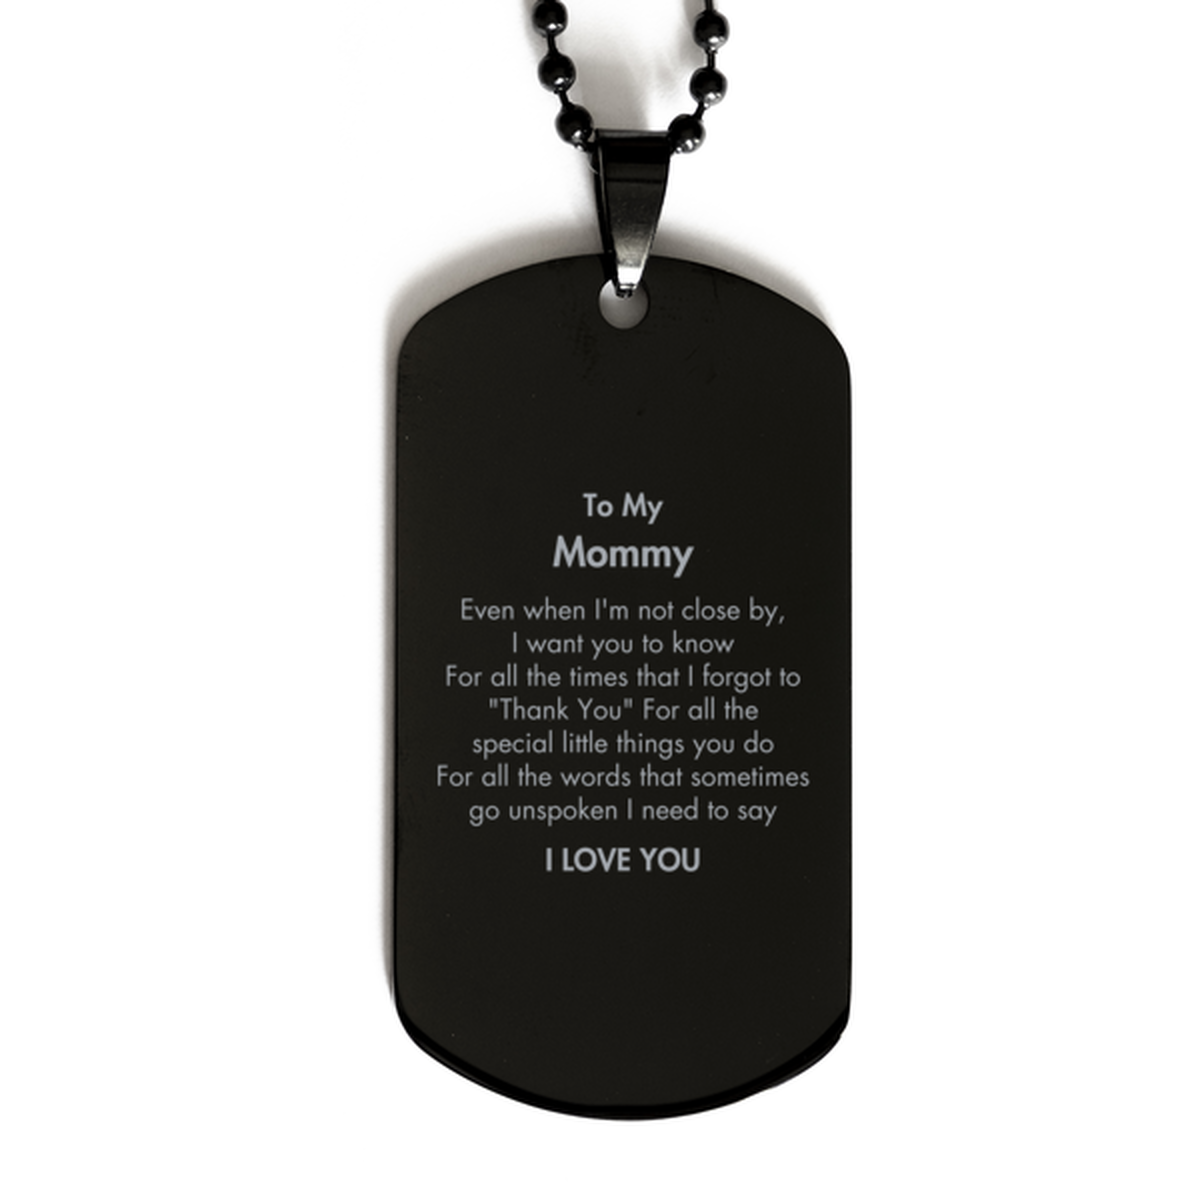 Thank You Gifts for Mommy, Keepsake Black Dog Tag Gifts for Mommy Birthday Mother's day Father's Day Mommy For all the words That sometimes go unspoken I need to say I LOVE YOU